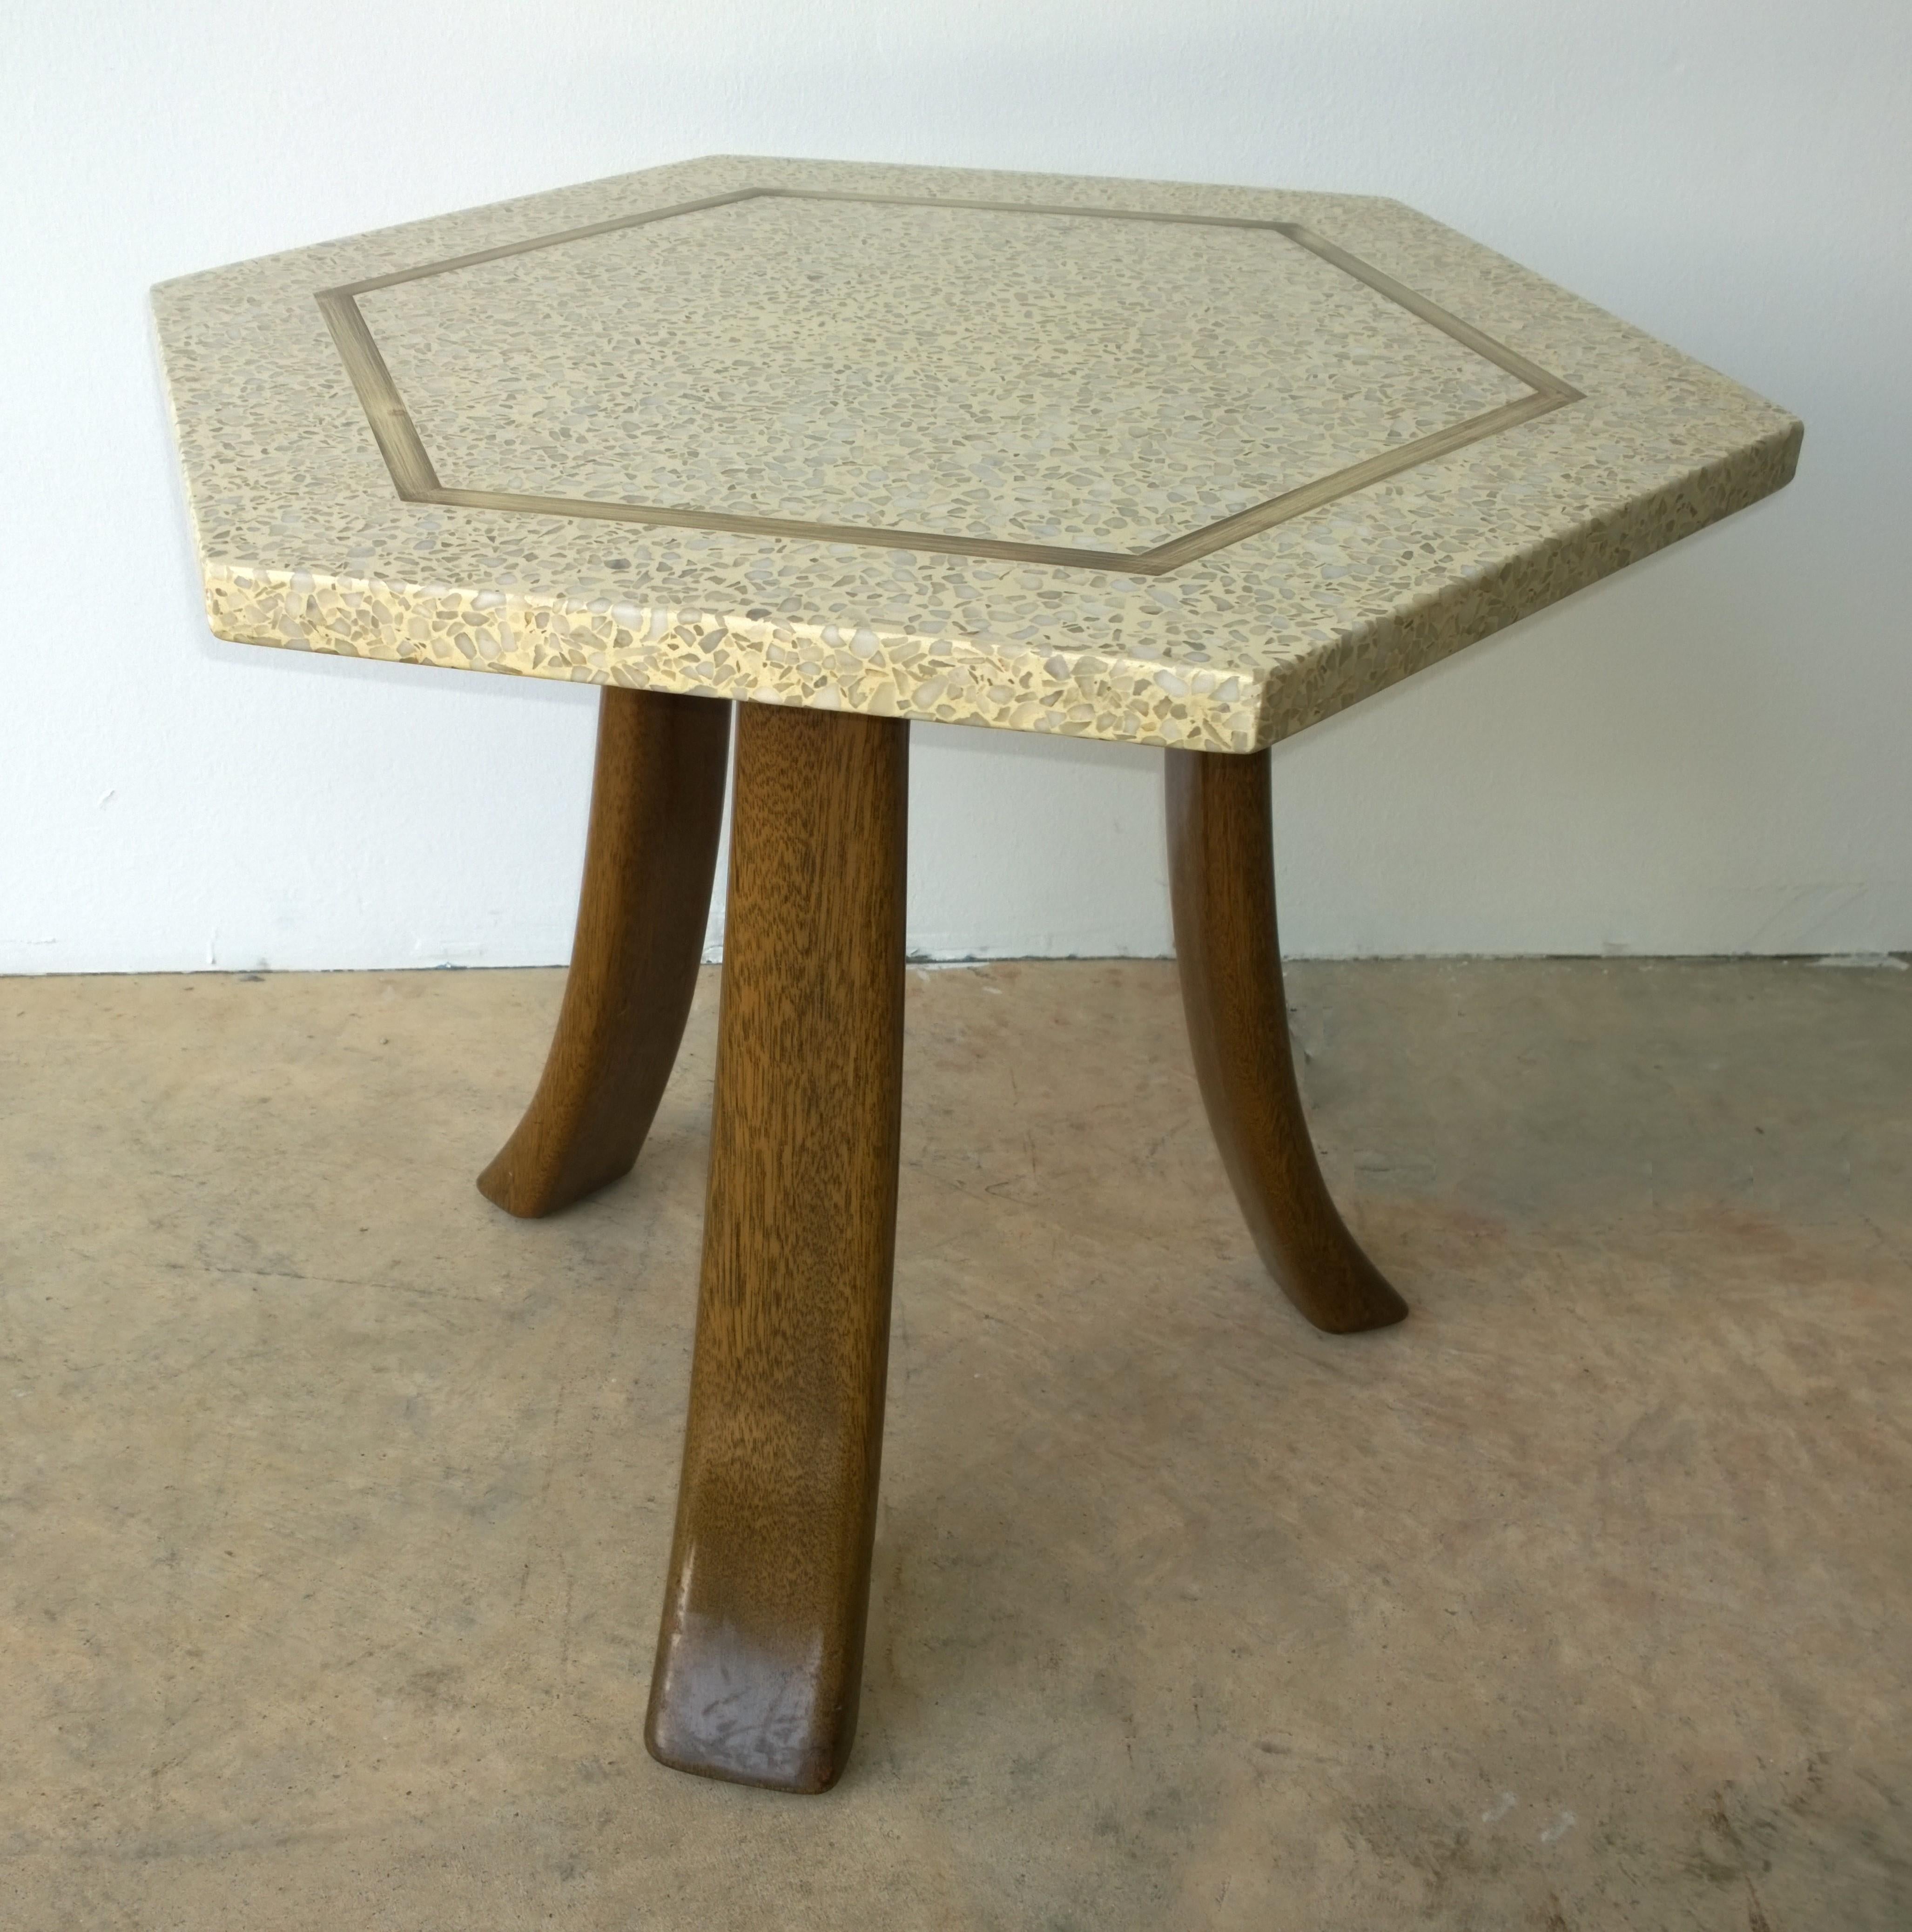 Offered is a pair of Mid-Century Modern Harvey Probber aqua blue and white terrazzo stone hexagon shaped top with brass inlay, on splayed tripod brown mahogany legs. The iconic Harvey Probber tripod side table design was produced with a cream